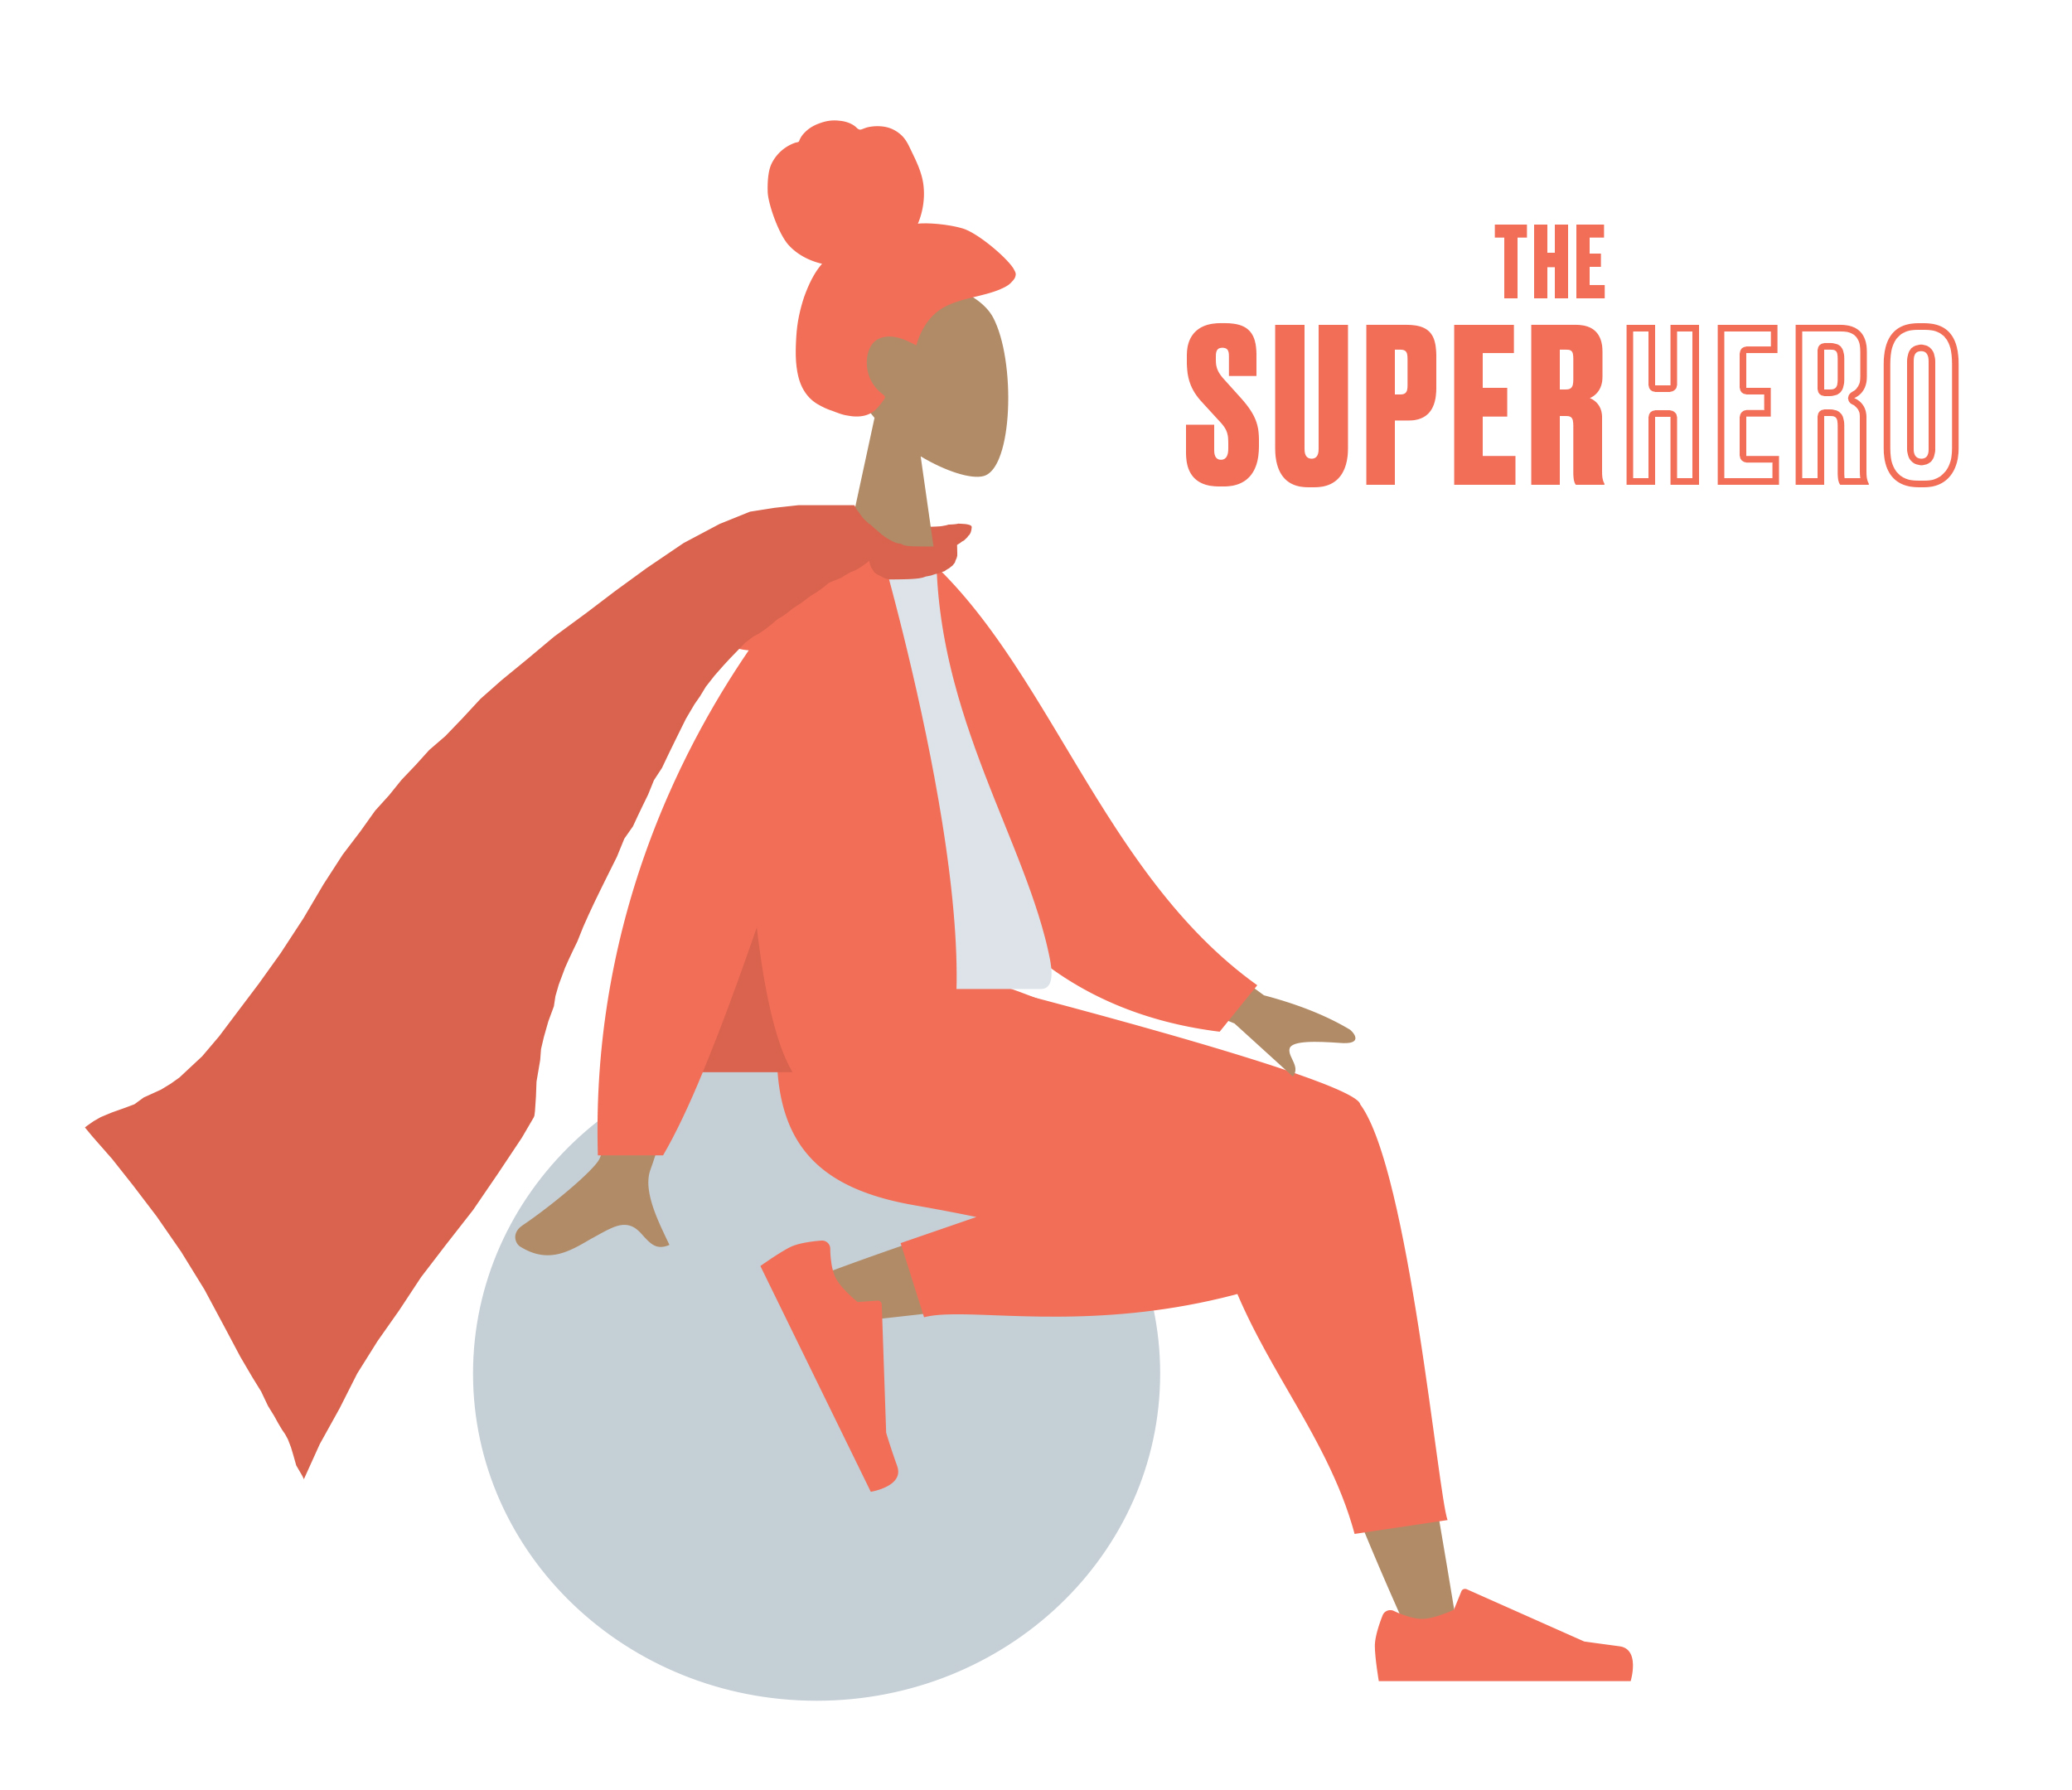 An illustration of a women wearing a cape, sitting on a ball. The caption reads The Superhero.